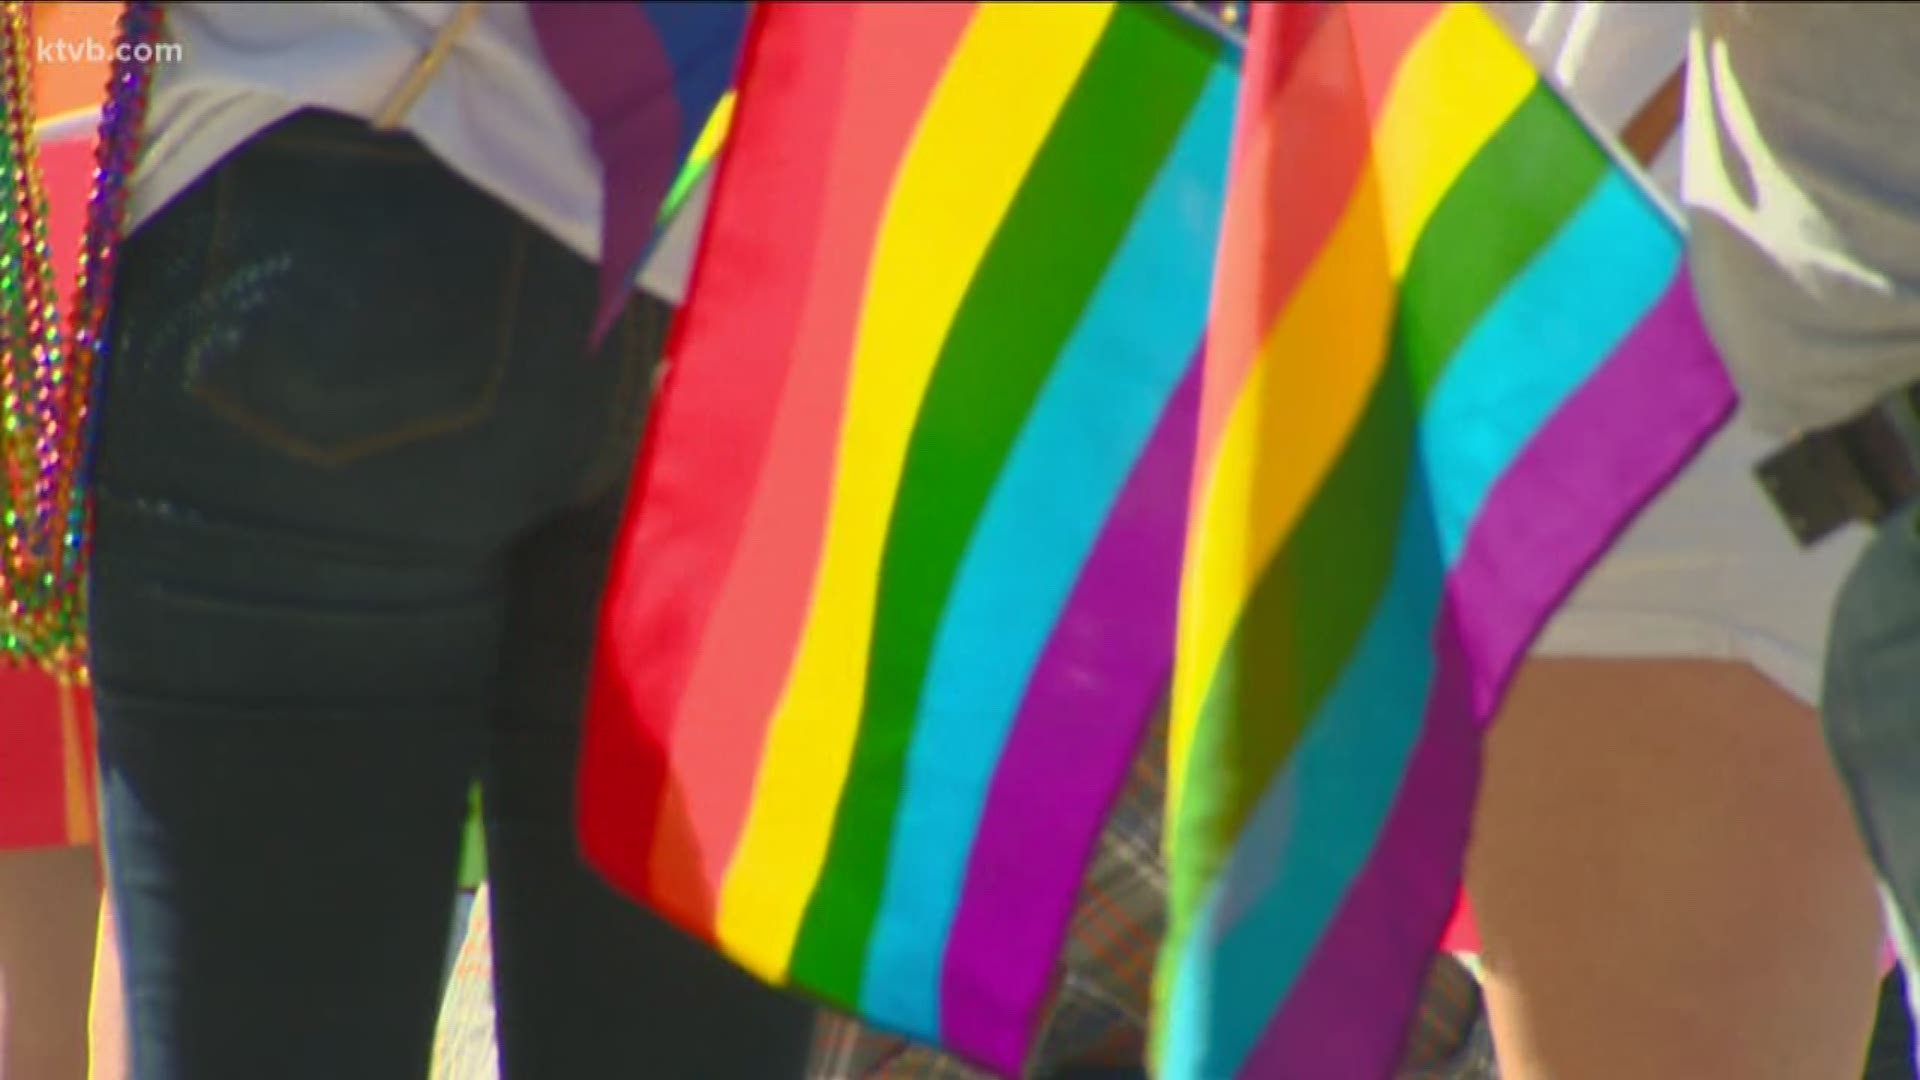 More than a dozen Idaho cities have passed ordinances banning discrimination against members of the LGBTQ community.